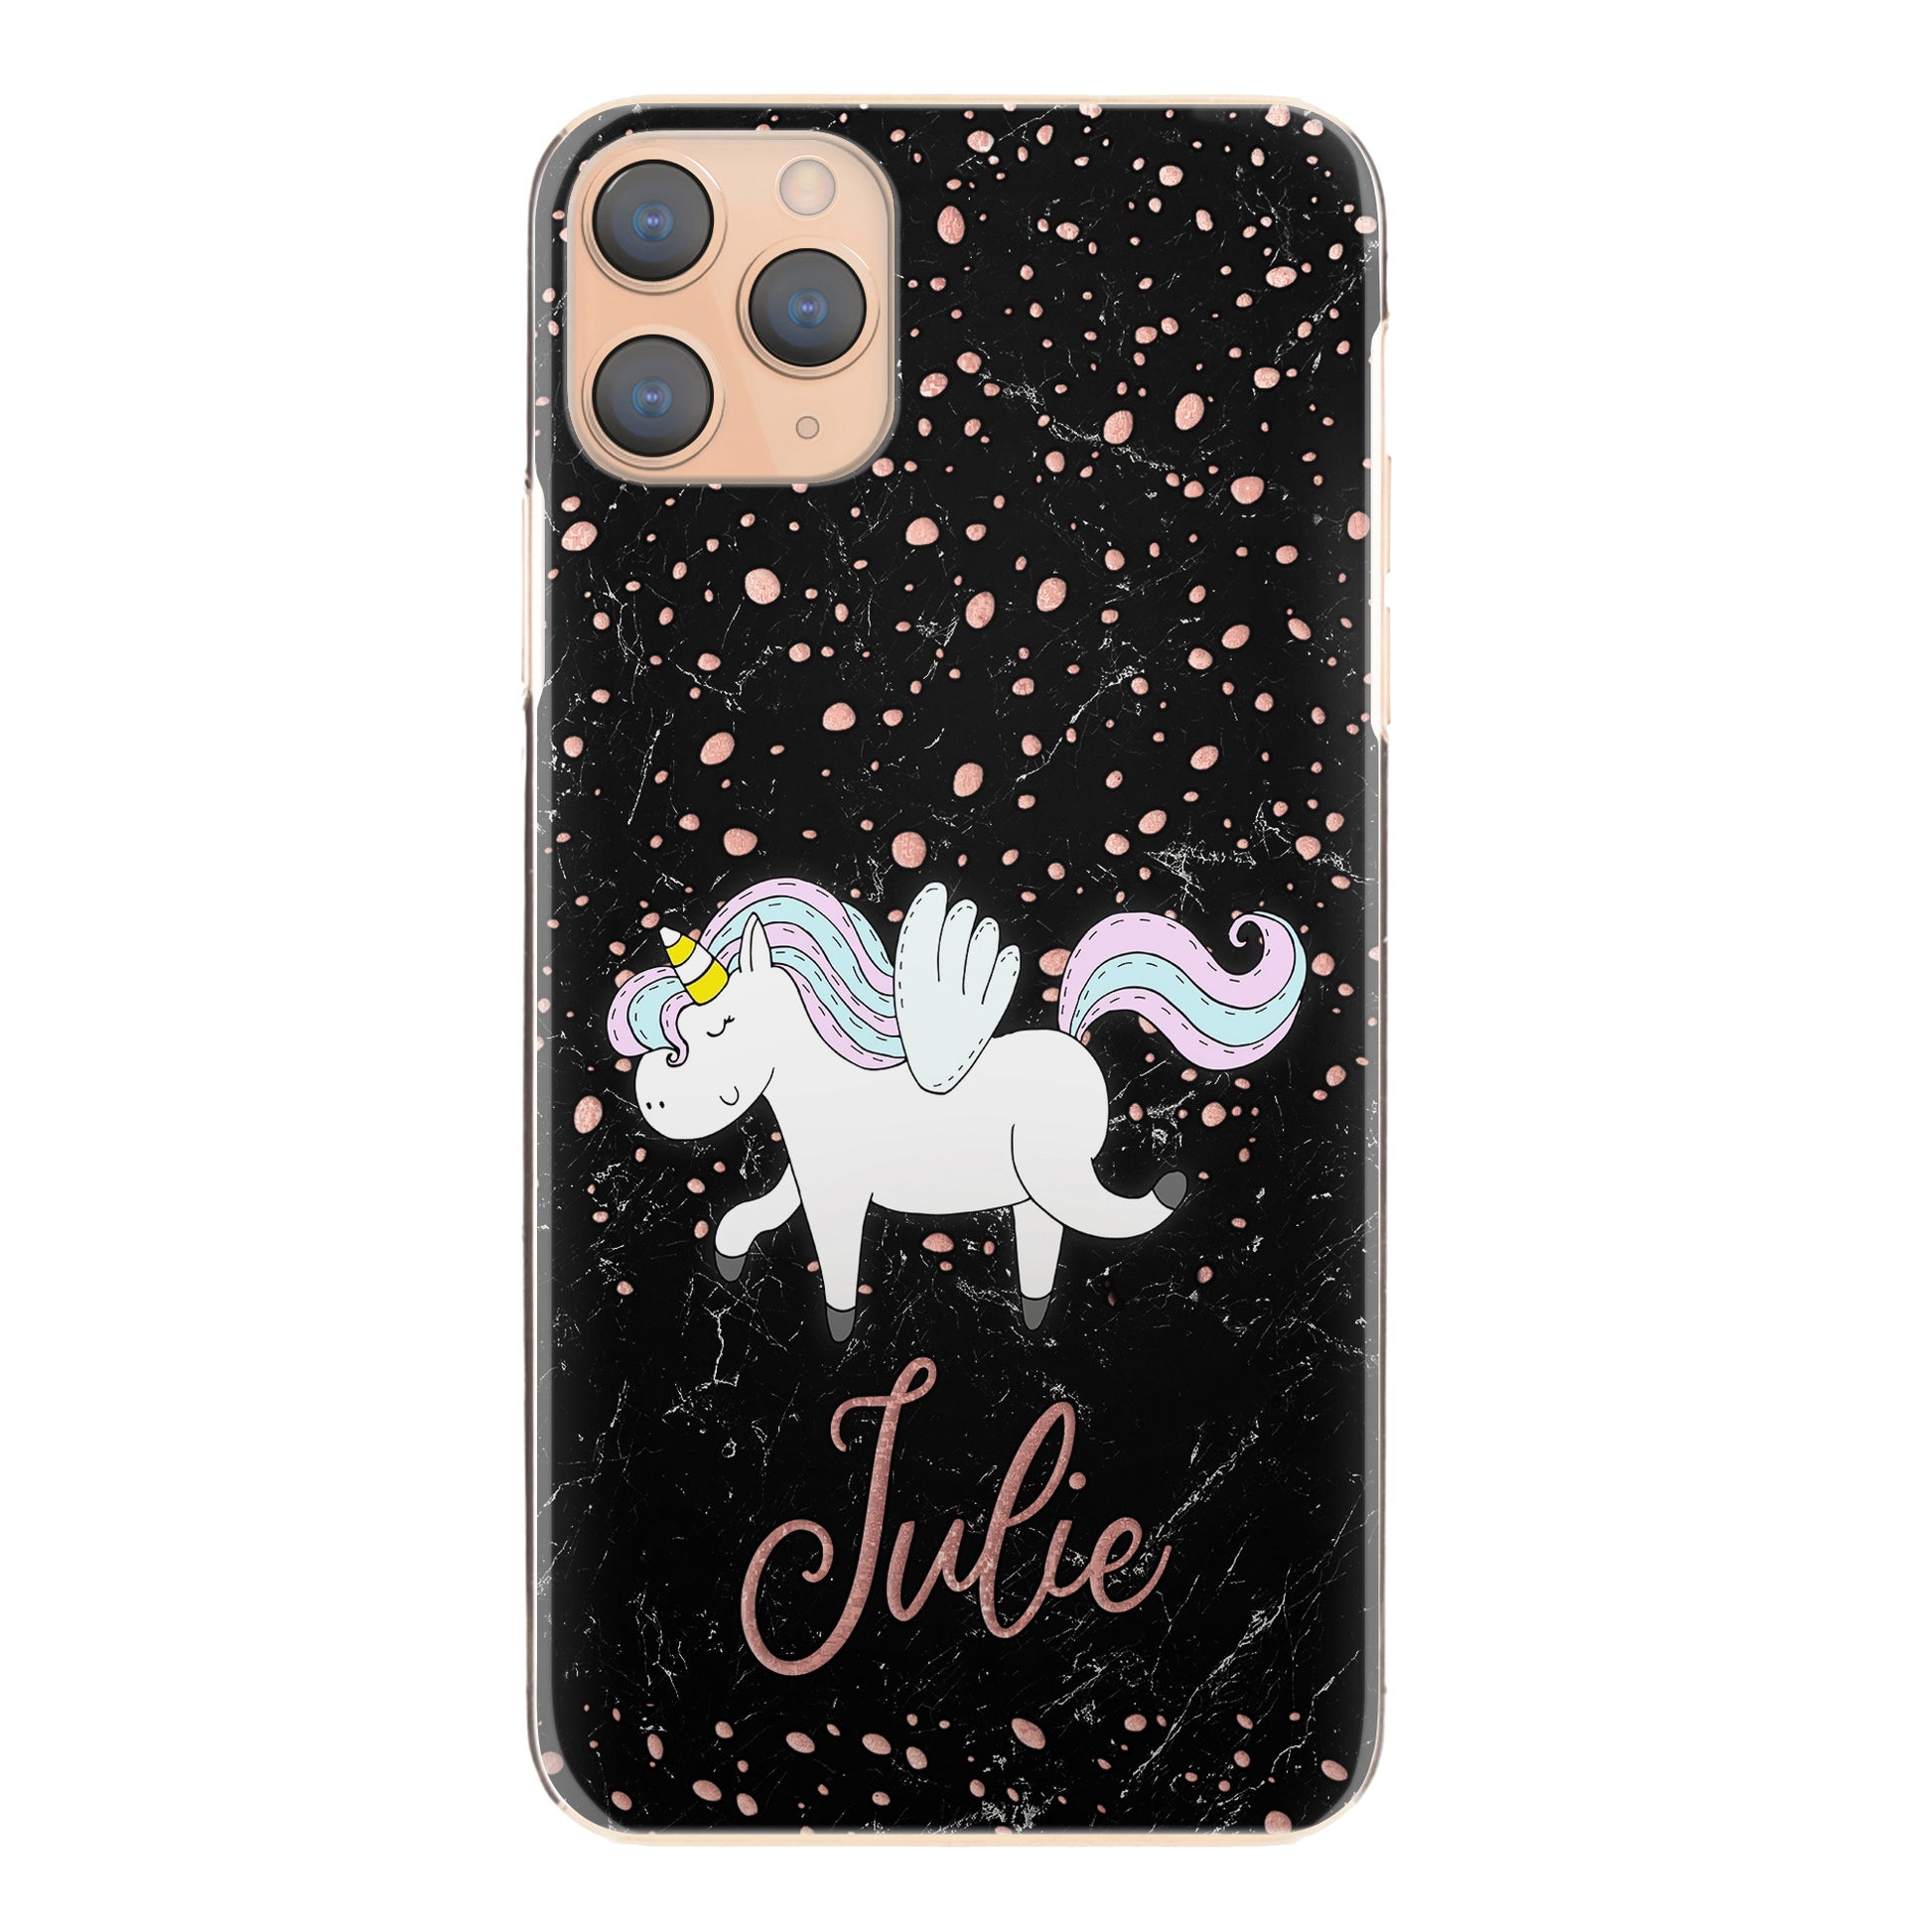 Personalised Samsung Galaxy Phone Hard Case with Winged Unicorn and Pink Text on Black Marble